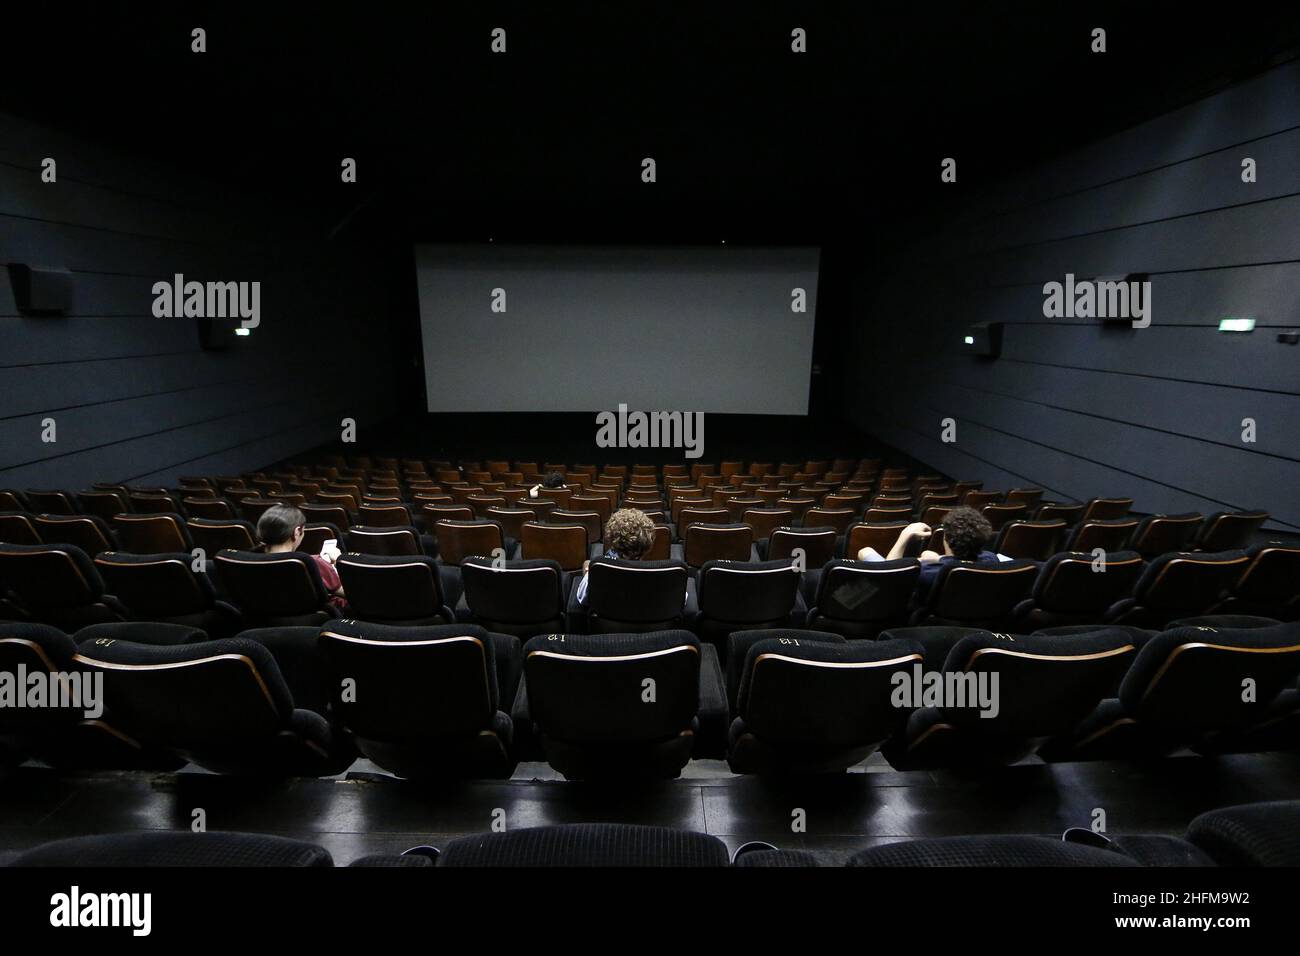 Uci cinemas hi-res stock photography and images - Alamy